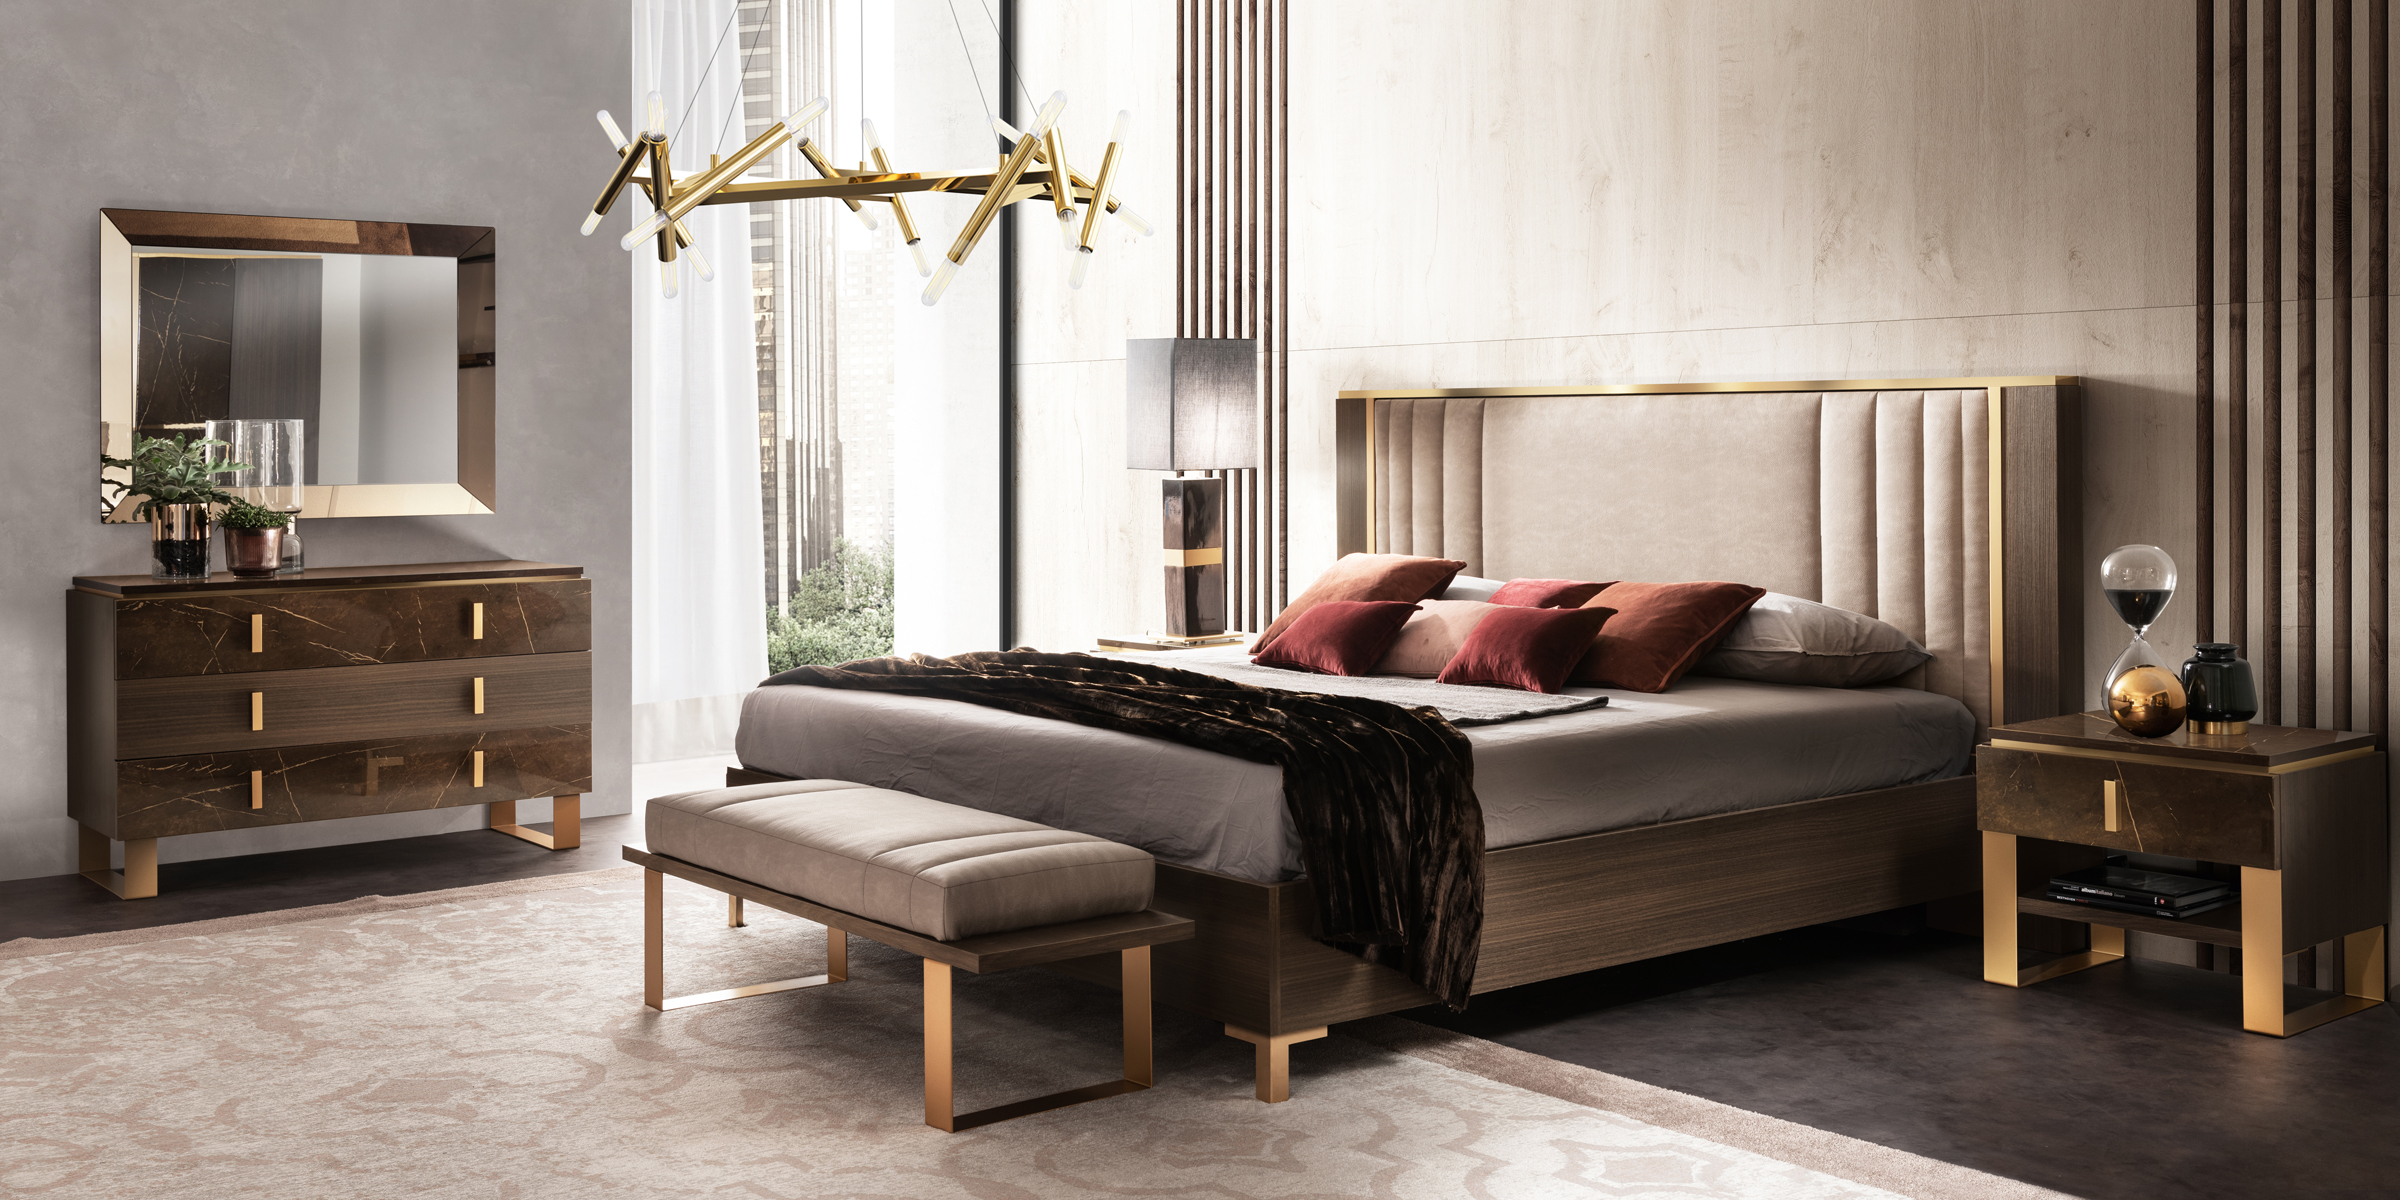 Bedroom Furniture Mirrors Essenza Bedroom by Arredoclassic, Italy Additional